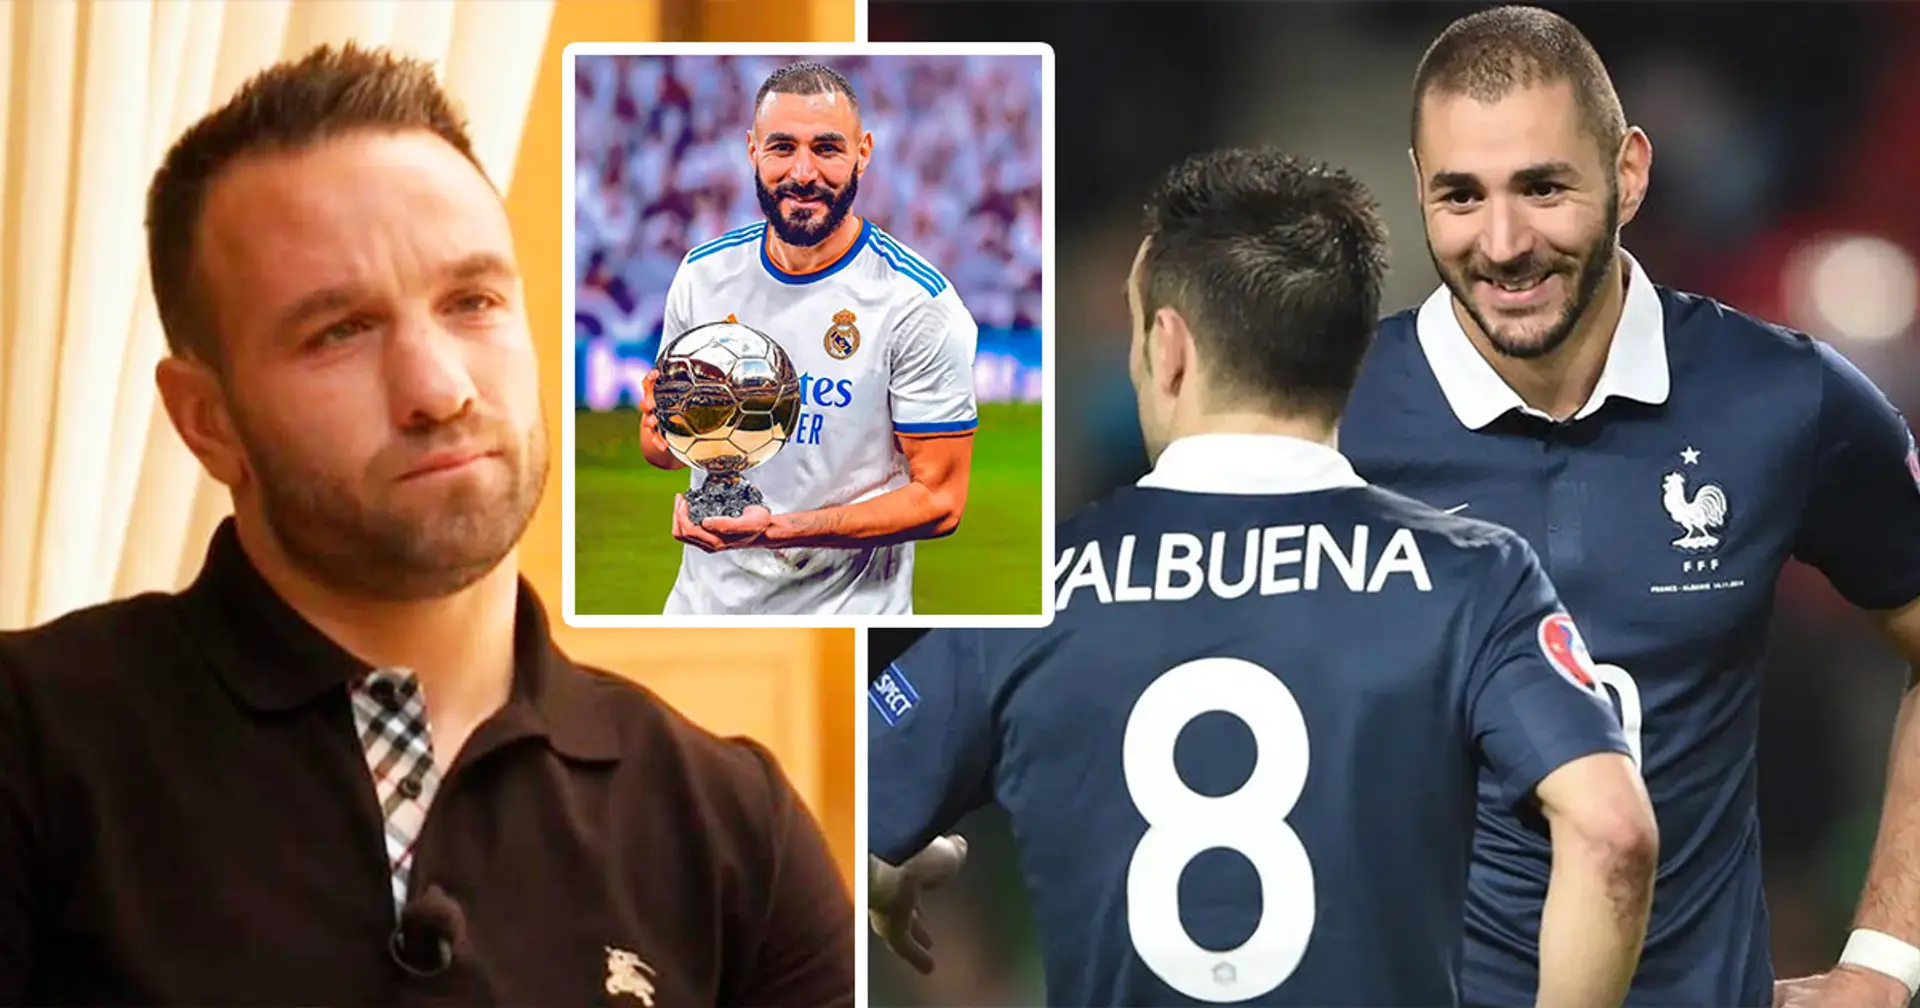 Valbuena gives brilliant response when asked if Benzema deserves to win the Ballon d'Or